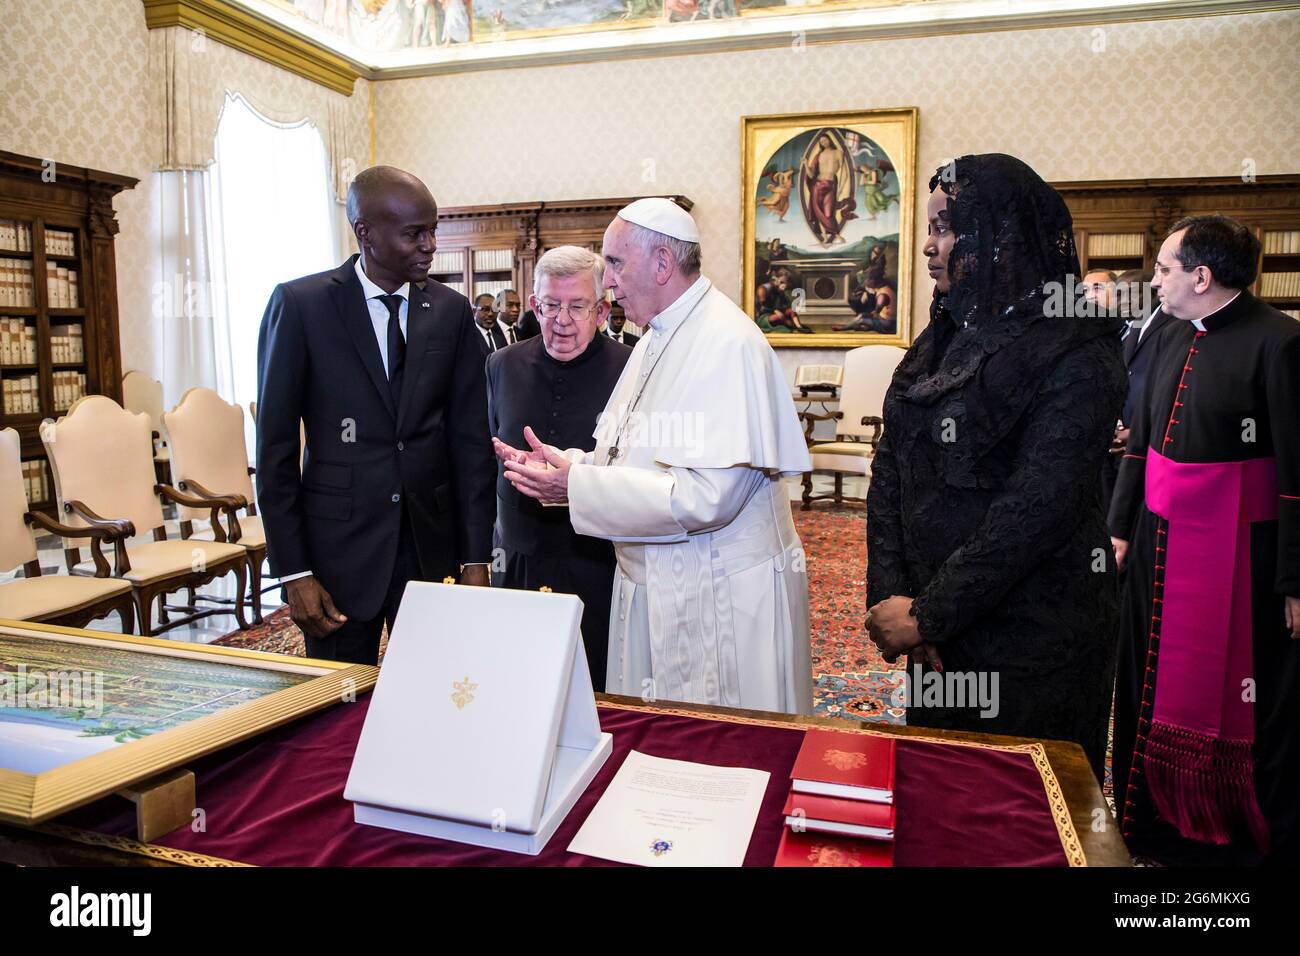 Vatican City State, Vatikanstadt. 07th July, 2021. the president of Haiti, Jovenel Moïse, was assassinated: he was 53 years old. In the photo Pope Francis with the President of the Republic of Haiti H.E. Mr. Jovenel Moise with his wife Martine Moïse. 26 January 2018 Credit: dpa/Alamy Live News Stock Photo